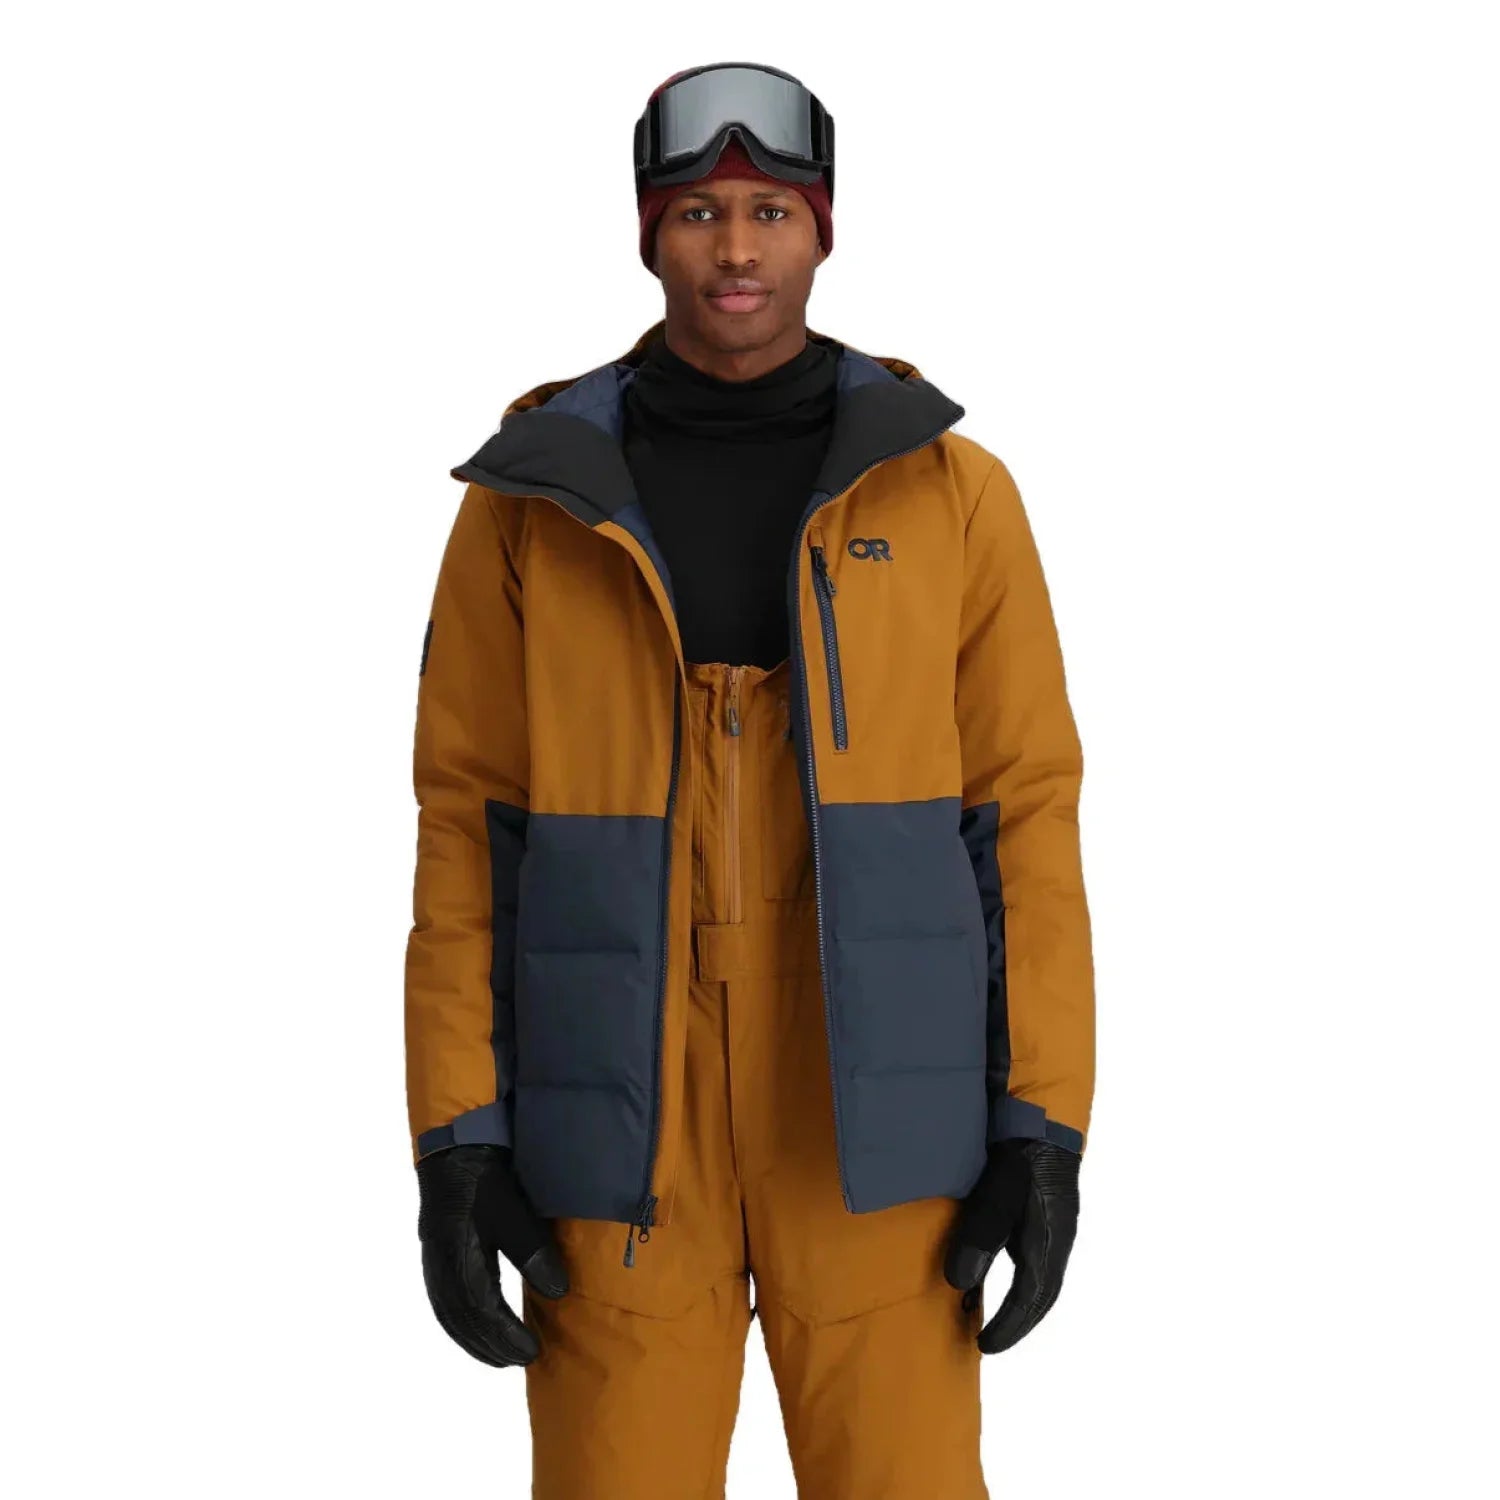 Outdoor Research Men's Snowcrew Down Jacket in Bronze and Naval Blue block coloring with OR logo and a vertical zipper on the upper left side of the jacket. Front View with Zipper Open.